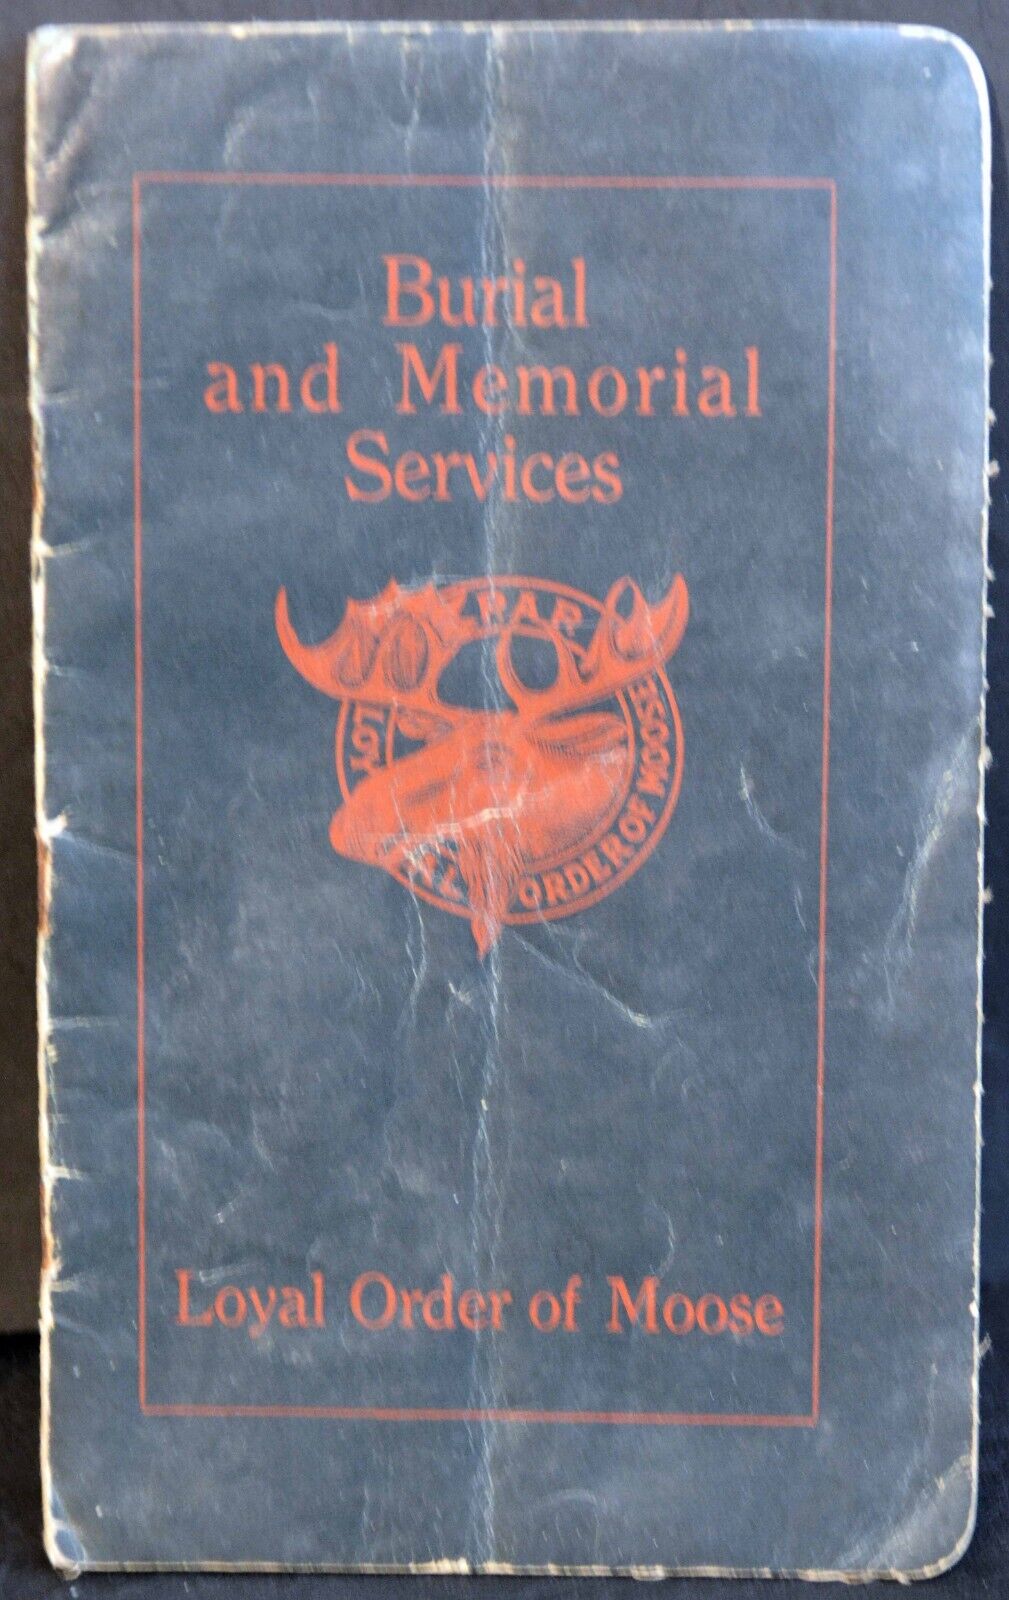 Booklet Burial and Memorial Services - Loyal Order of Moose